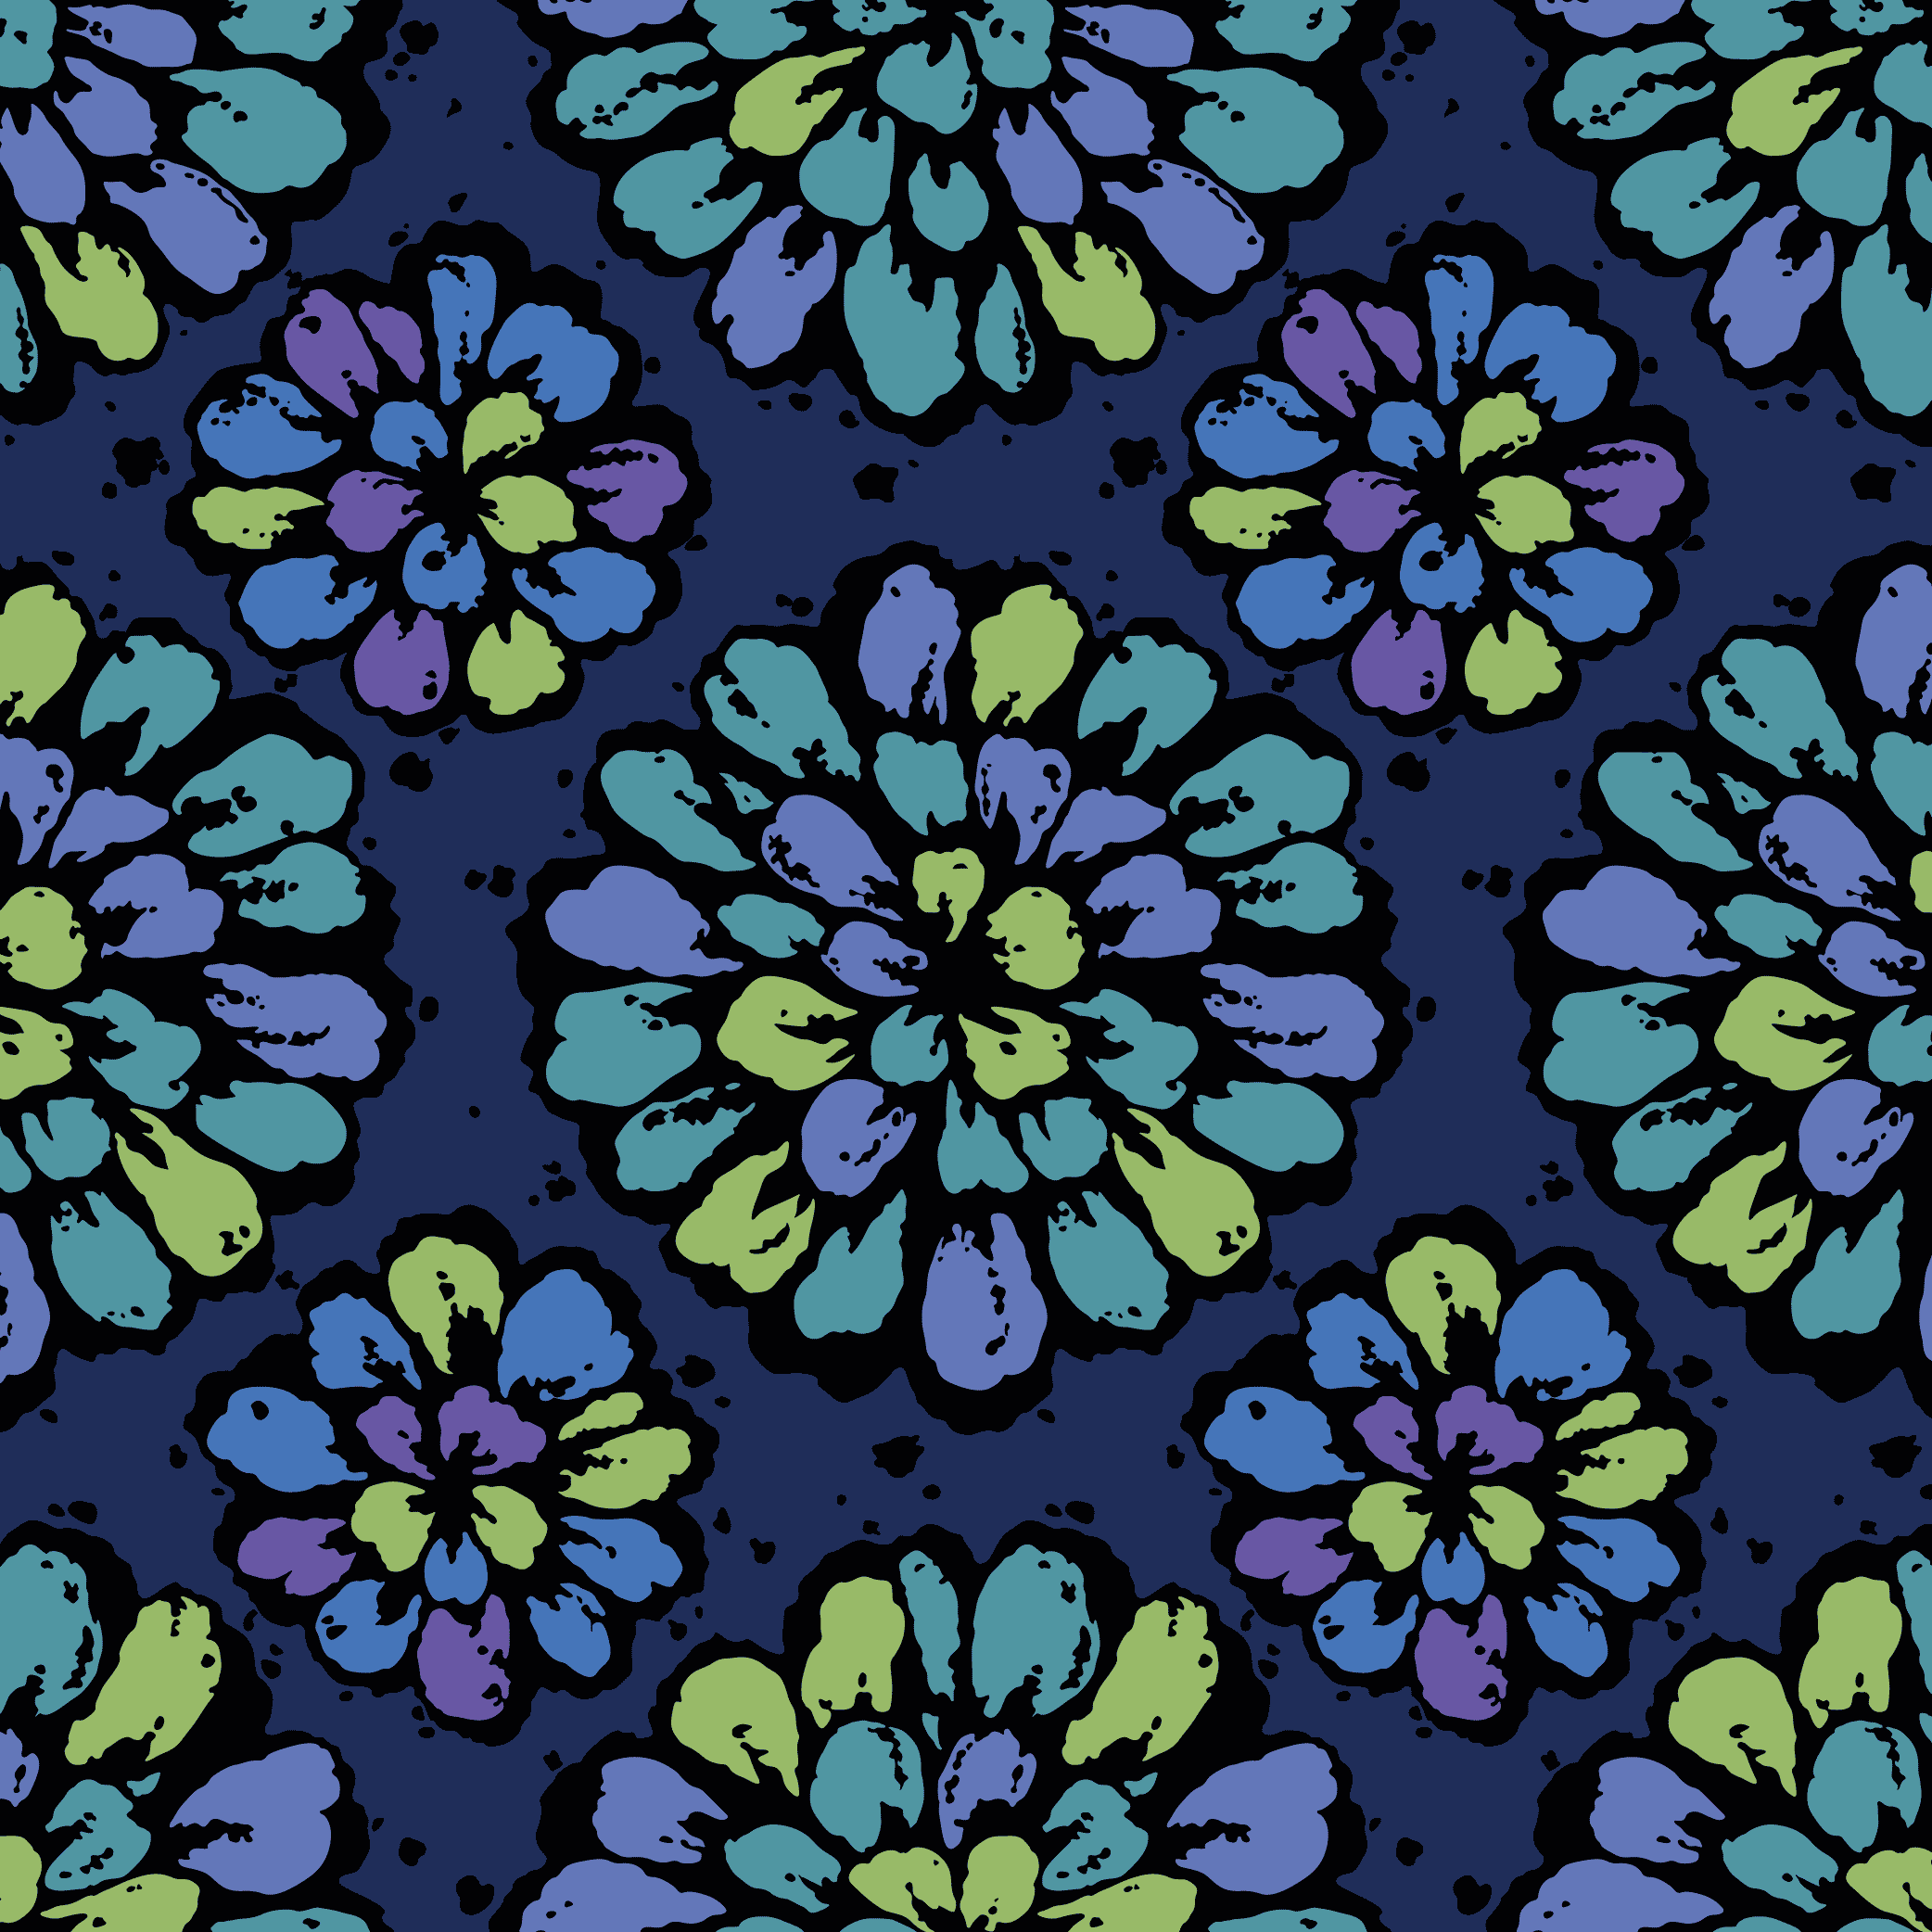 Blue and green floral design image